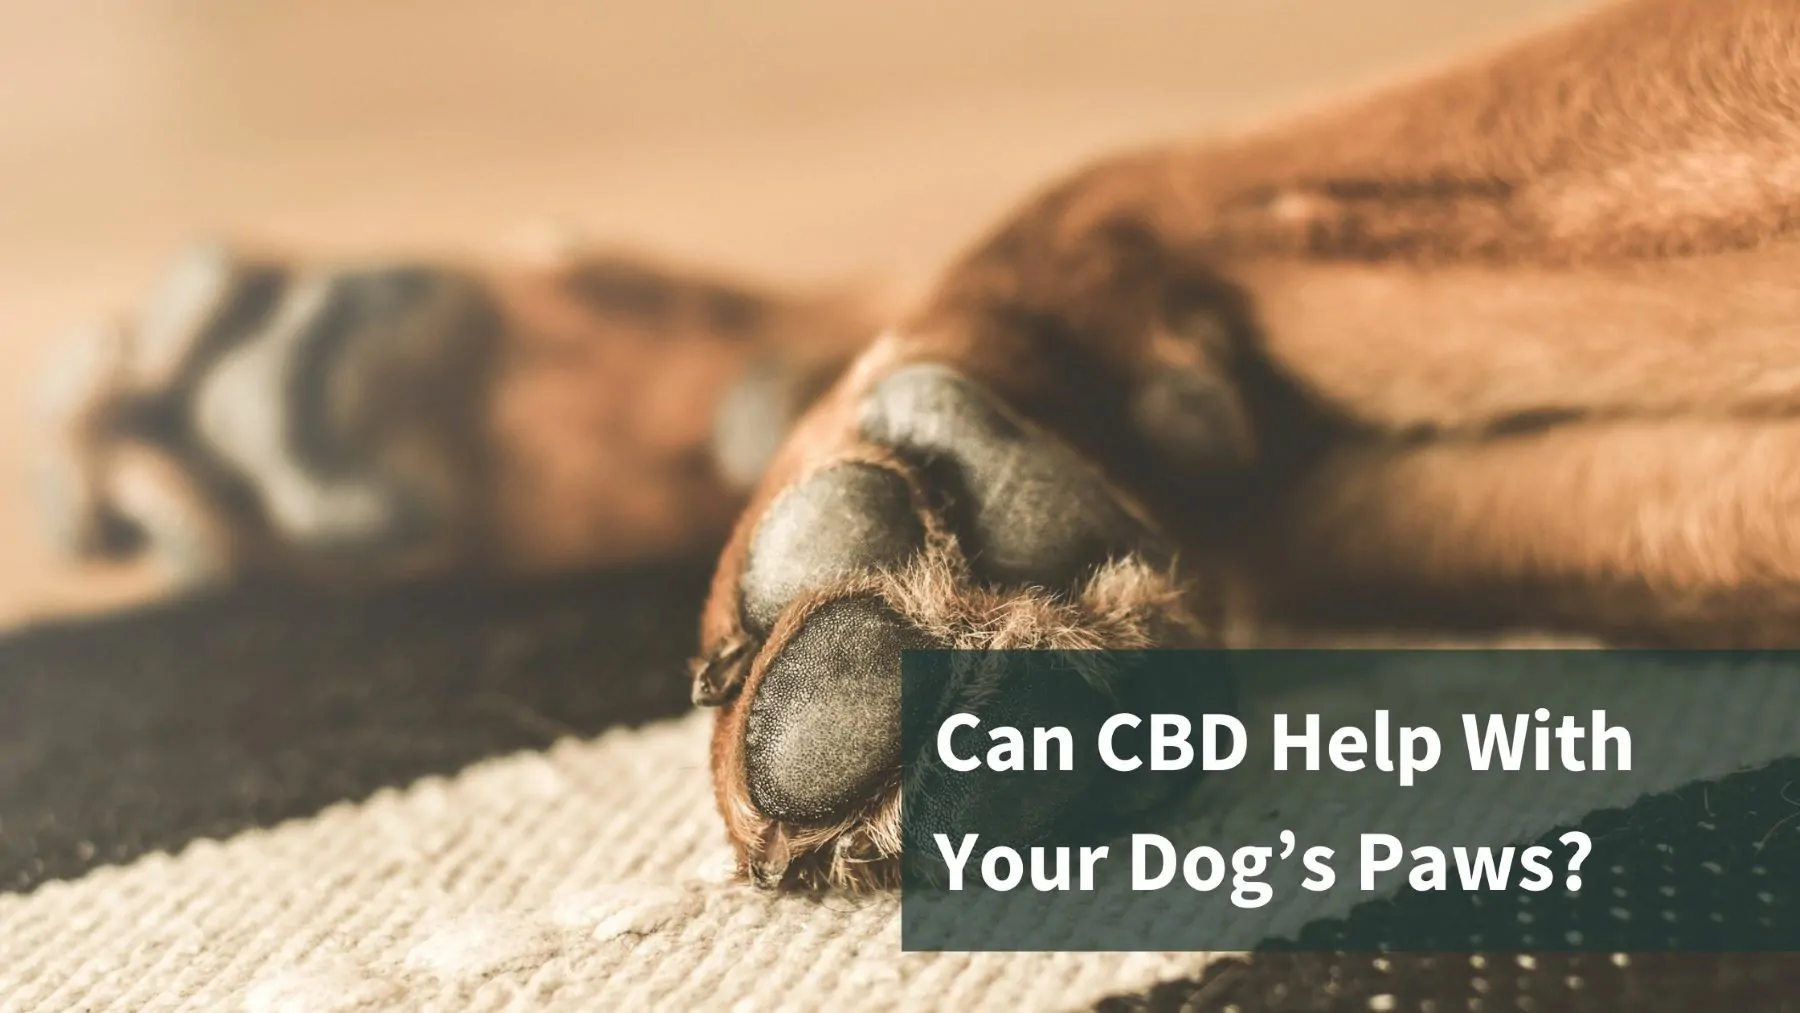 Two dog paws outstretched with the text "Can CBD Help With Your Dog's Paws?"